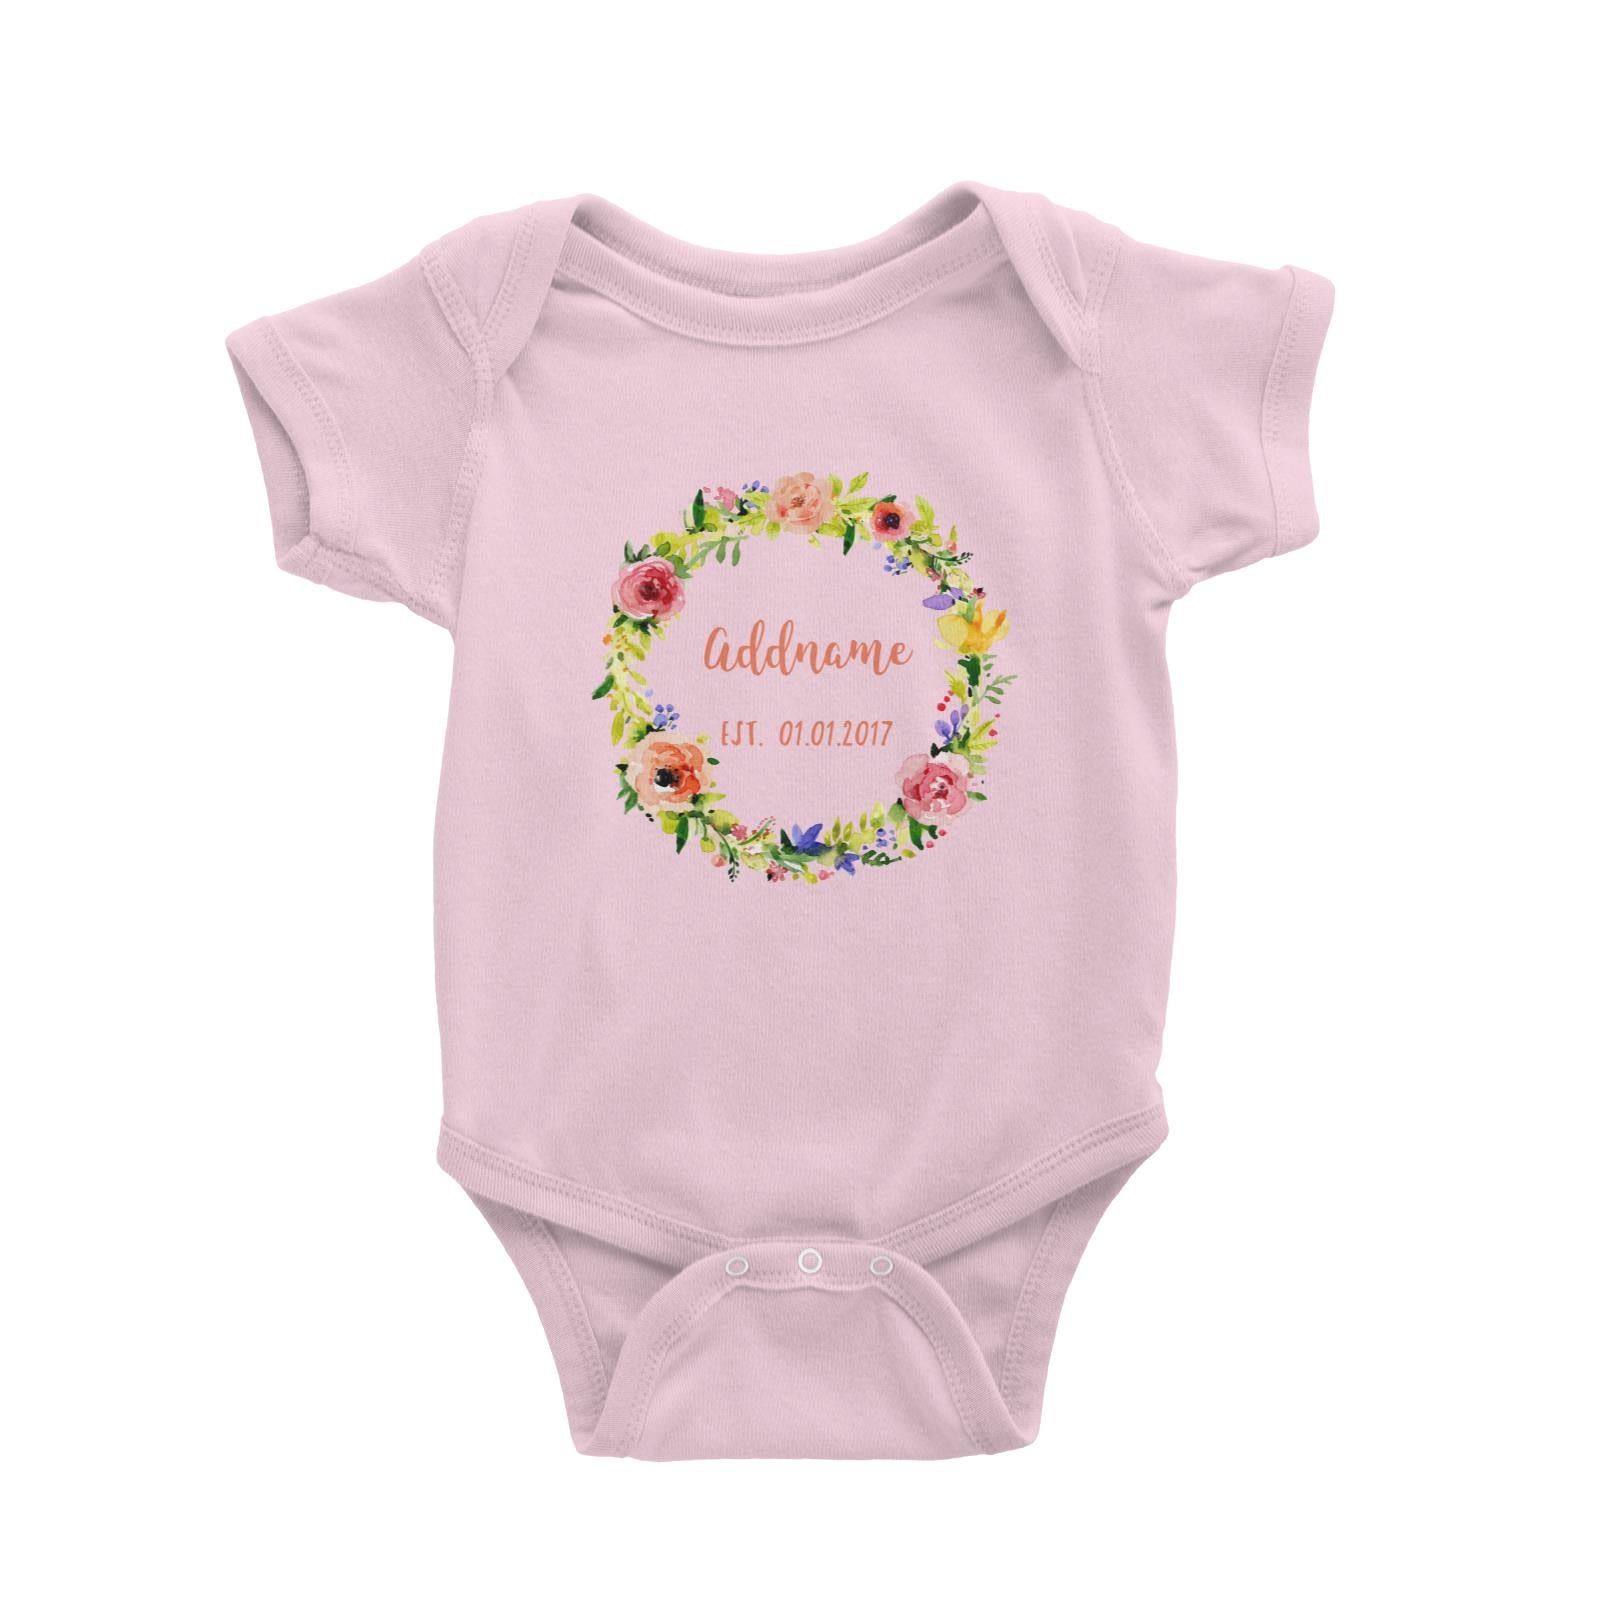 Add Name and Add Date in Spring Flower Wreath Baby Romper